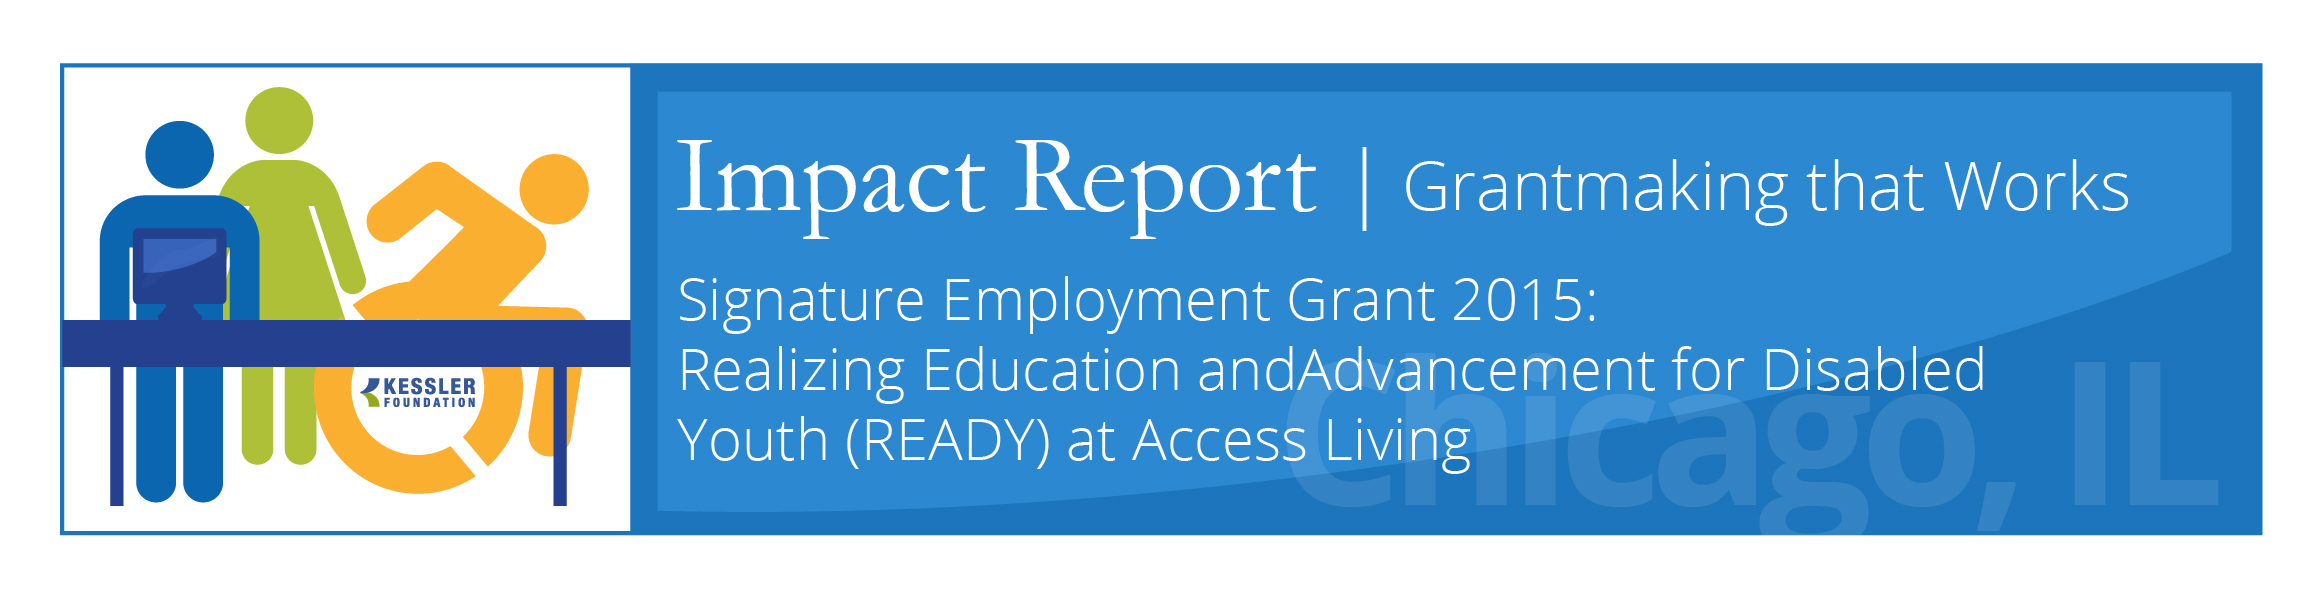 impact report grantmaking that works